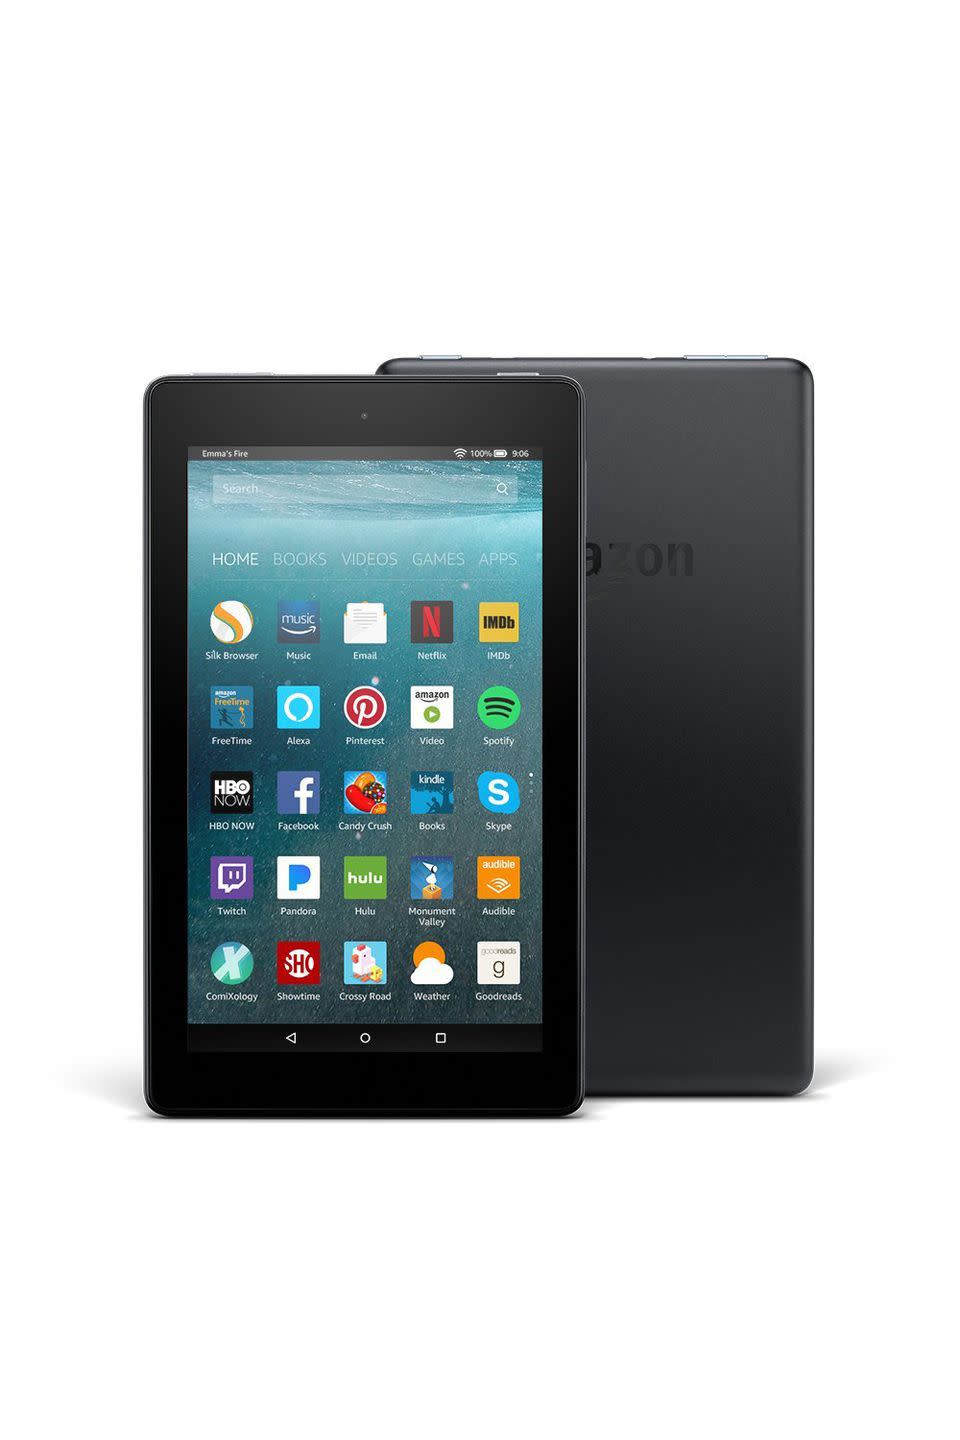 6) Fire 7 Tablet with Alexa